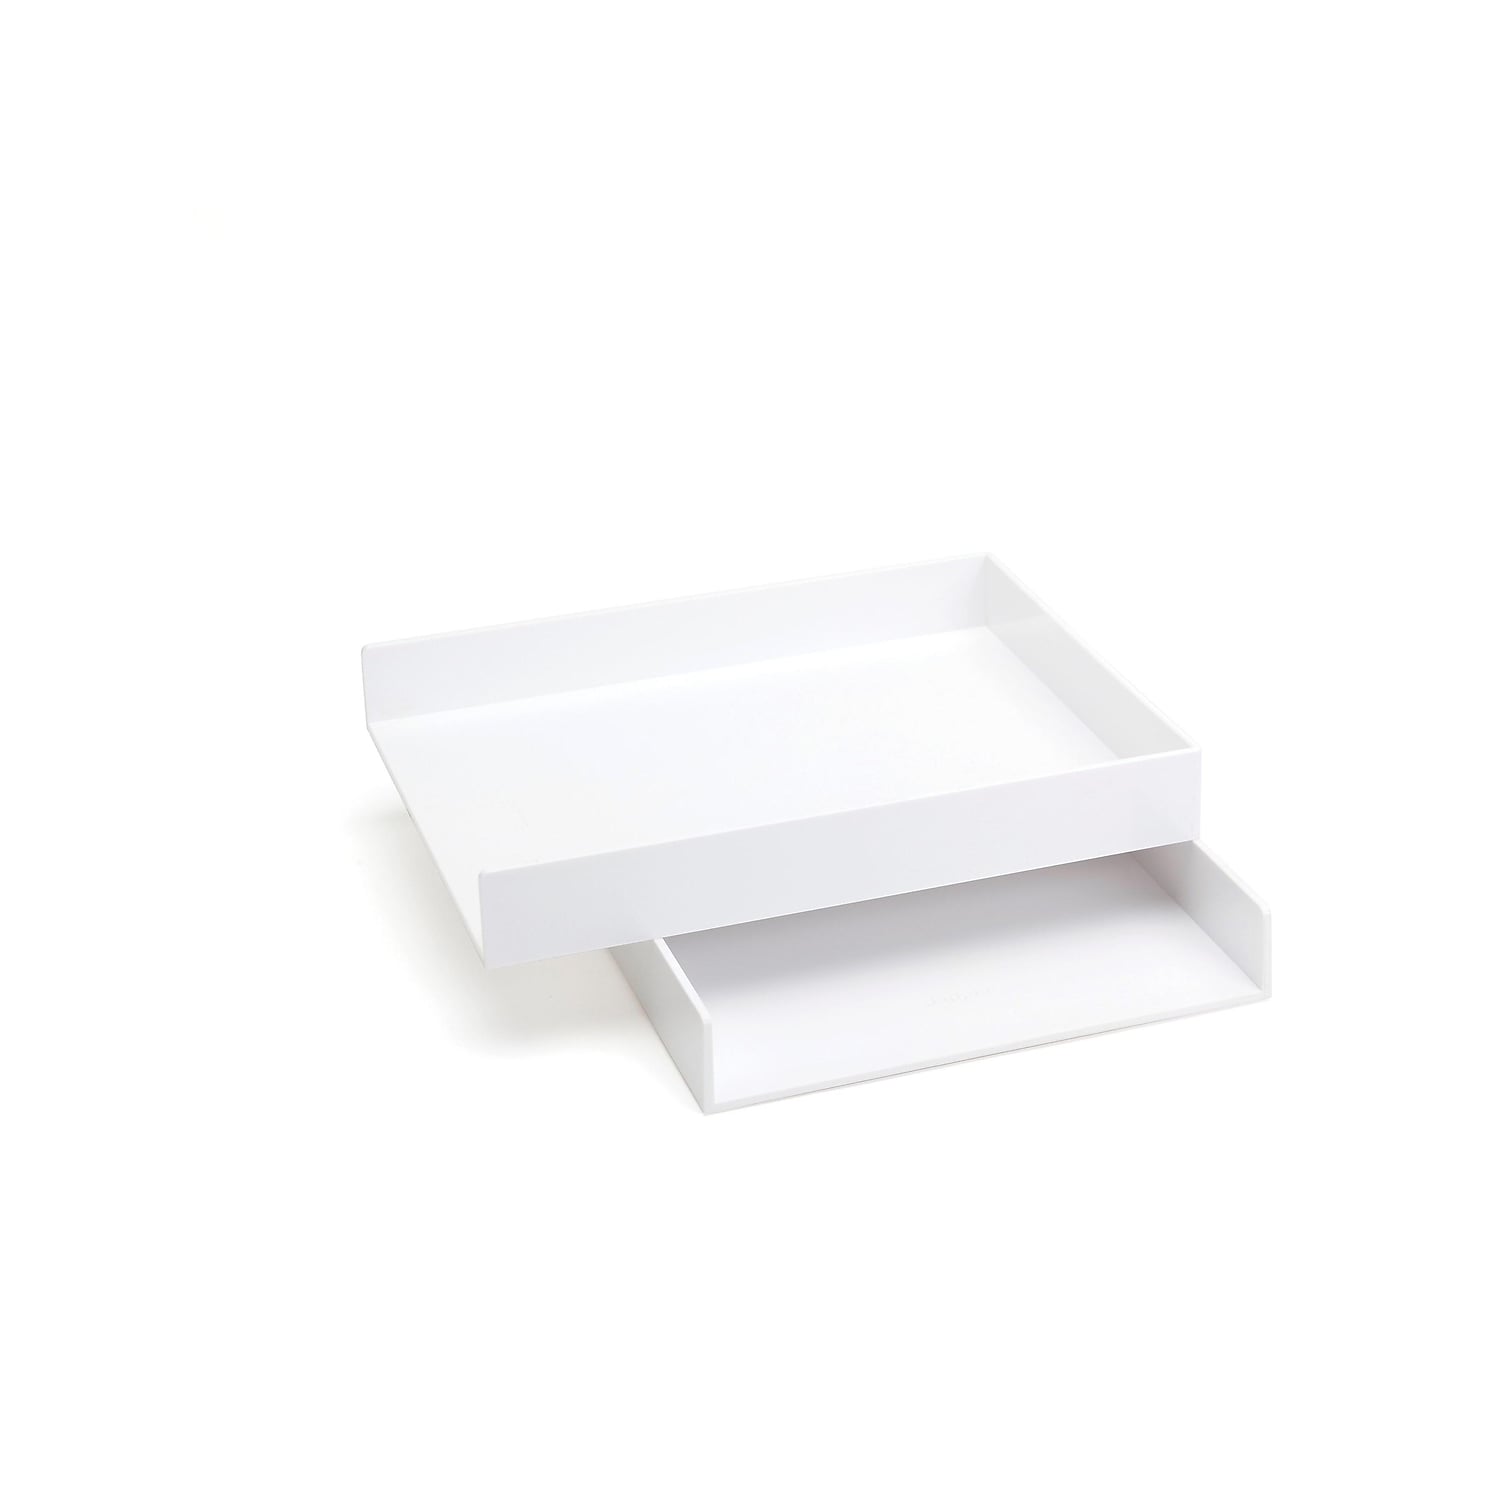 Poppin Front Loading Letter Trays White 2/Pack 100212 - image 2 of 3